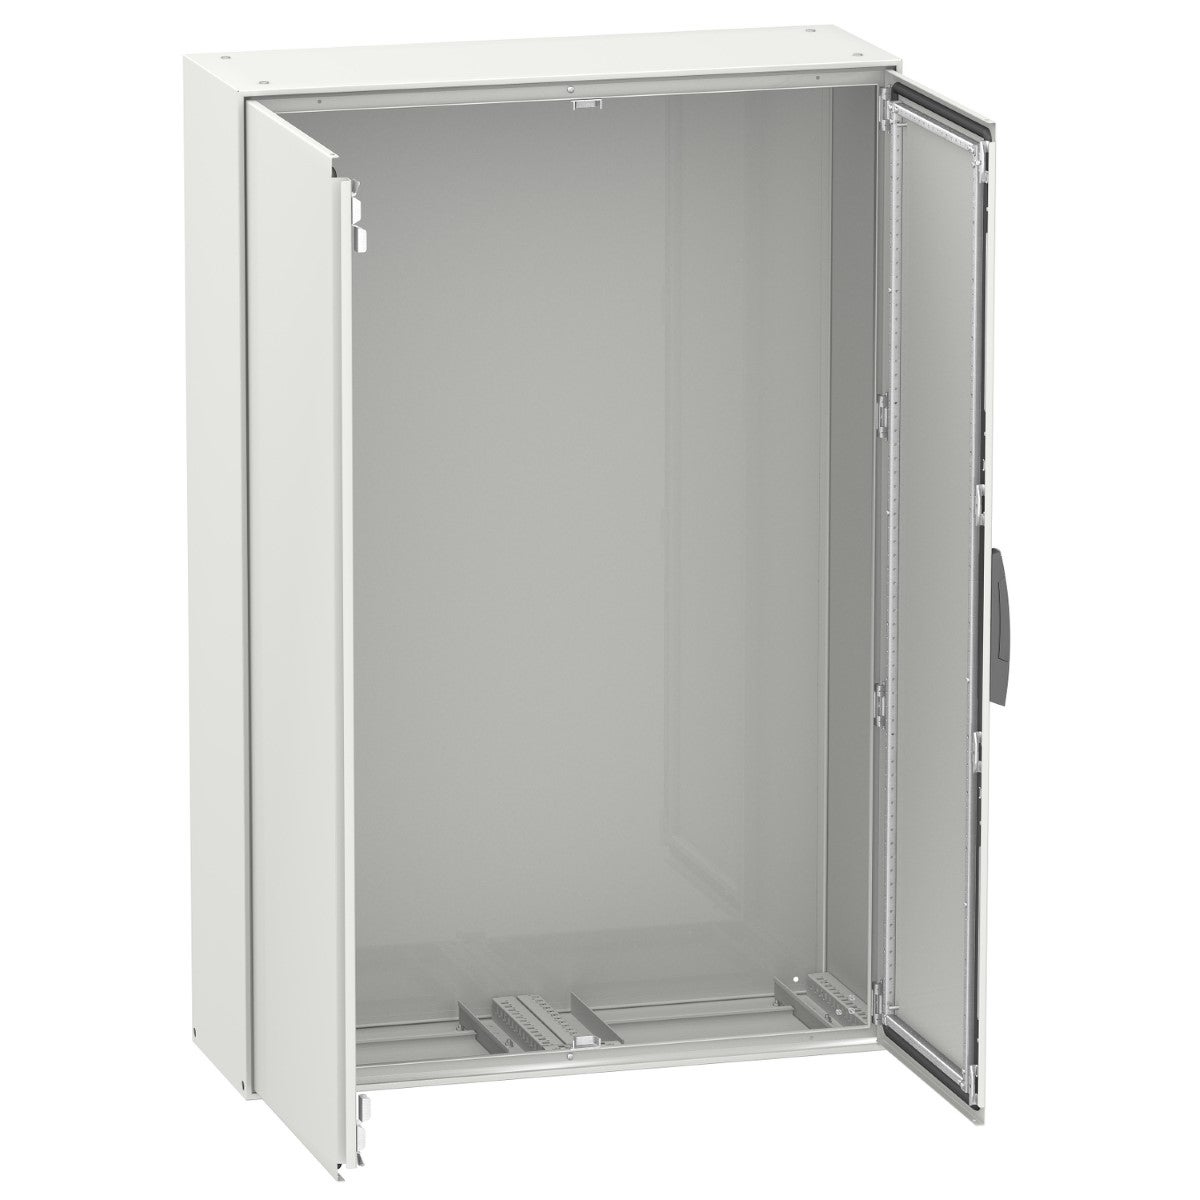 Spacial SM compact enclosure without mounting plate - 2000x1000x500 mm